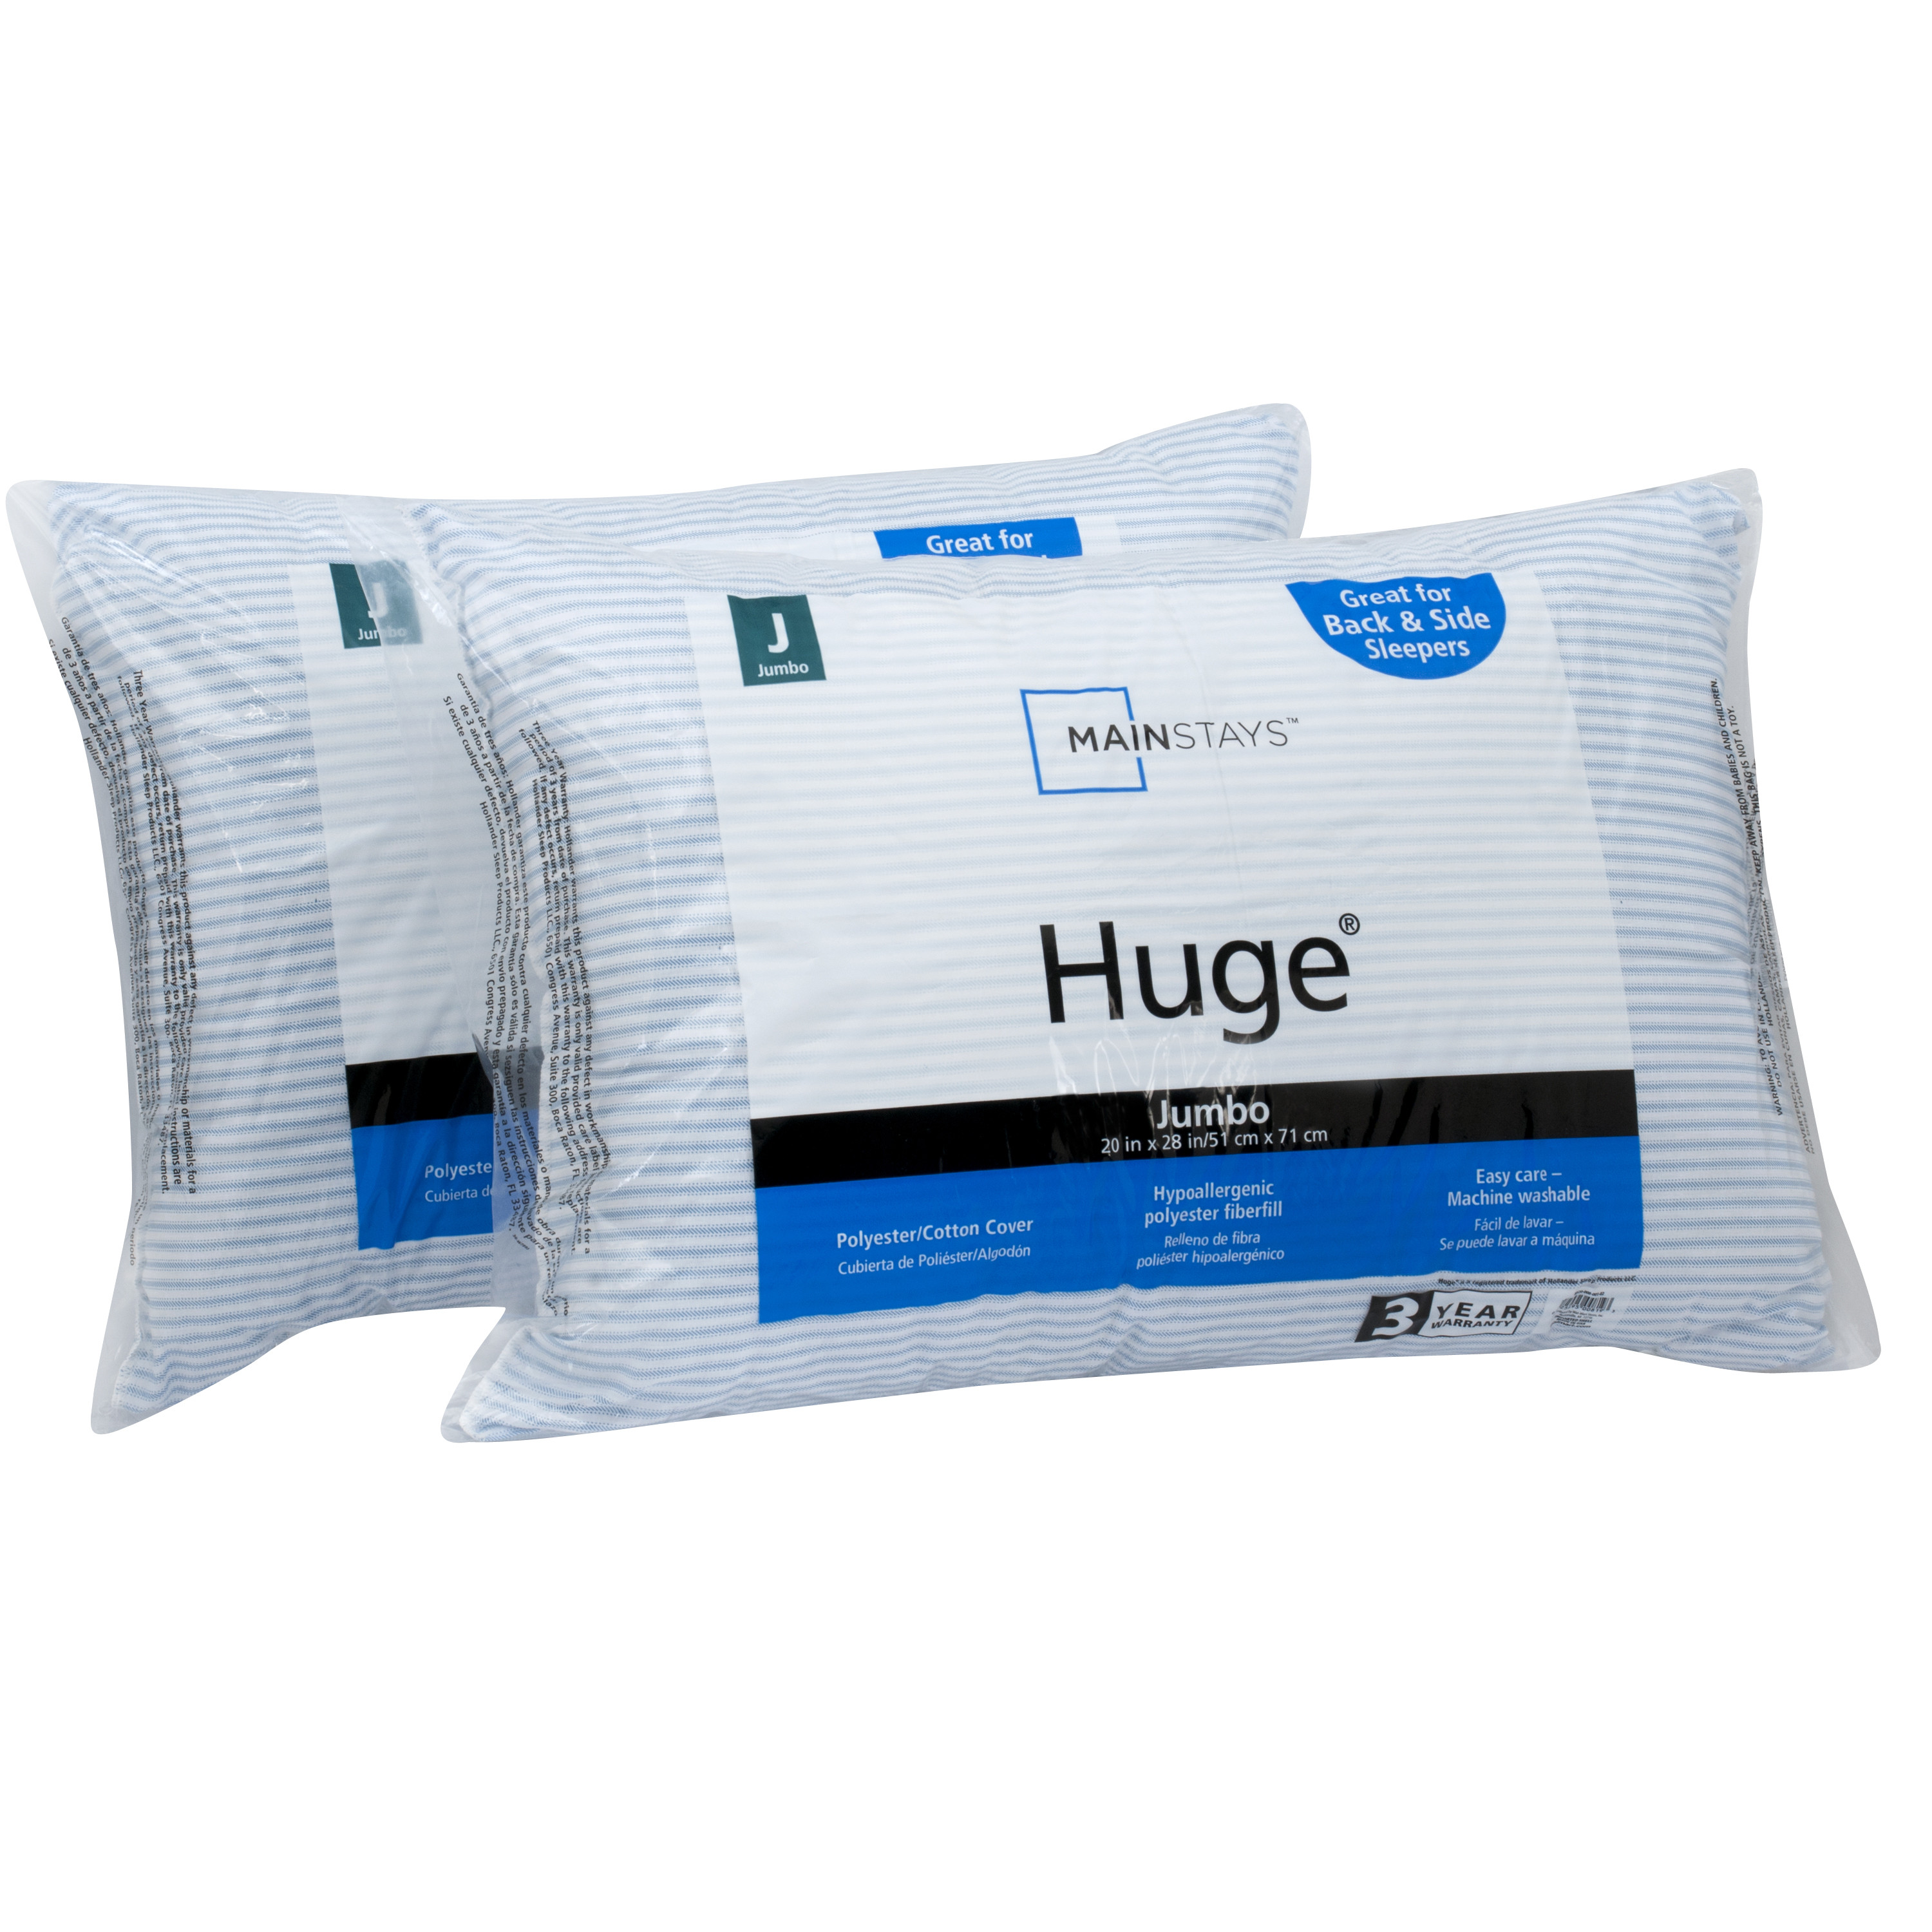 Mainstays HUGE Bed Pillow, Jumbo, 2 Pack - image 1 of 7